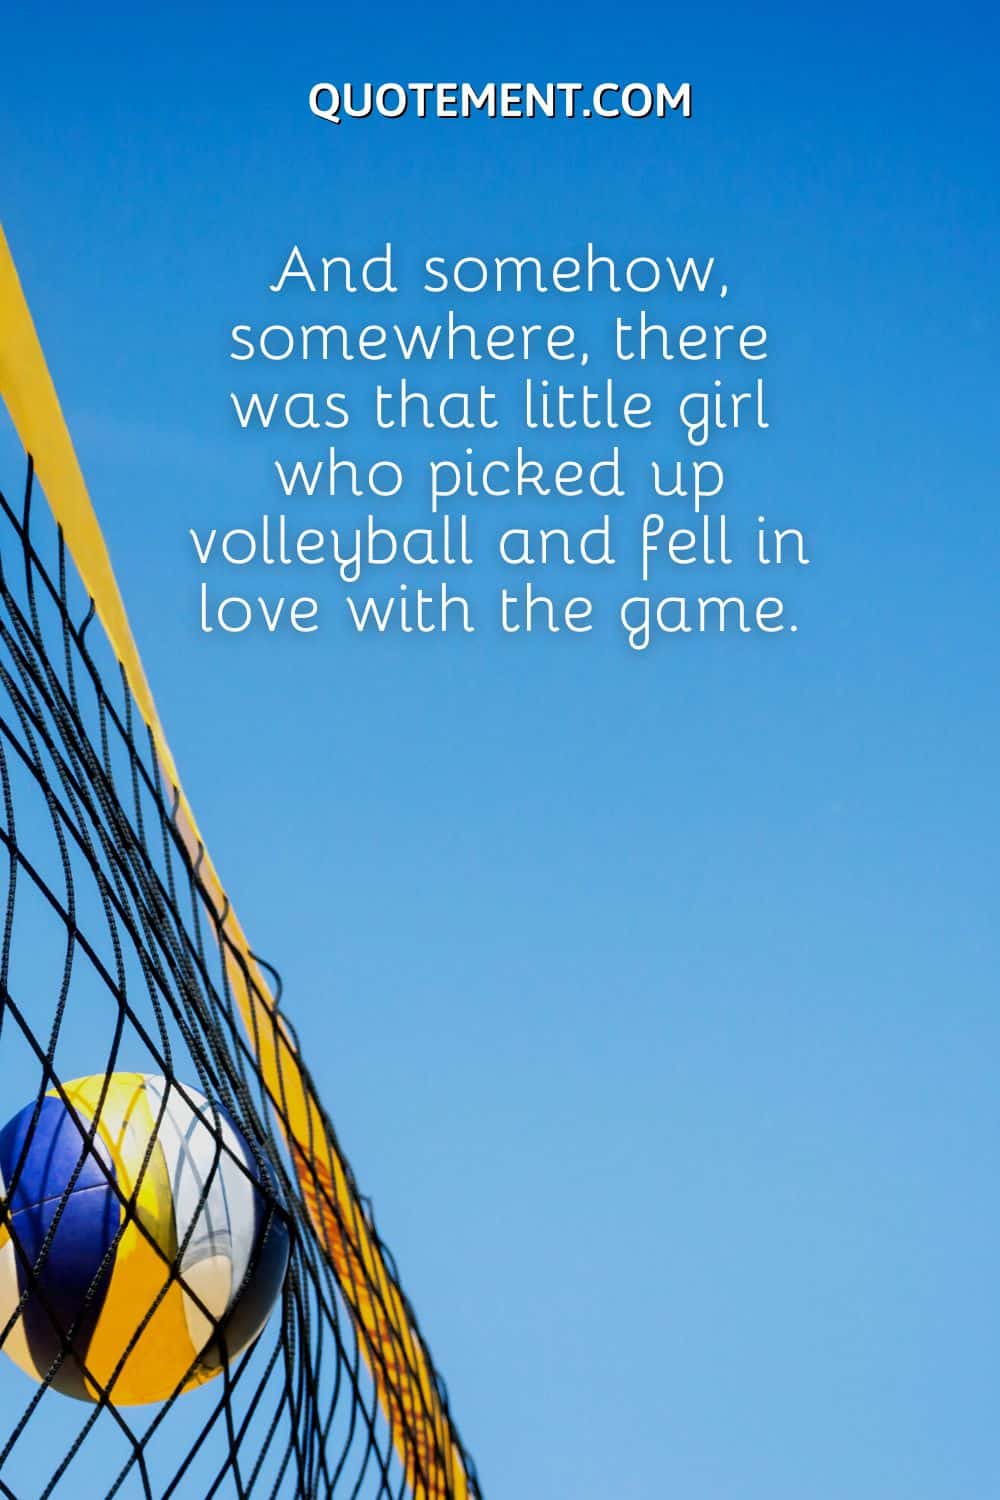 And somehow, somewhere, there was that little girl who picked up volleyball and fell in love with the game.